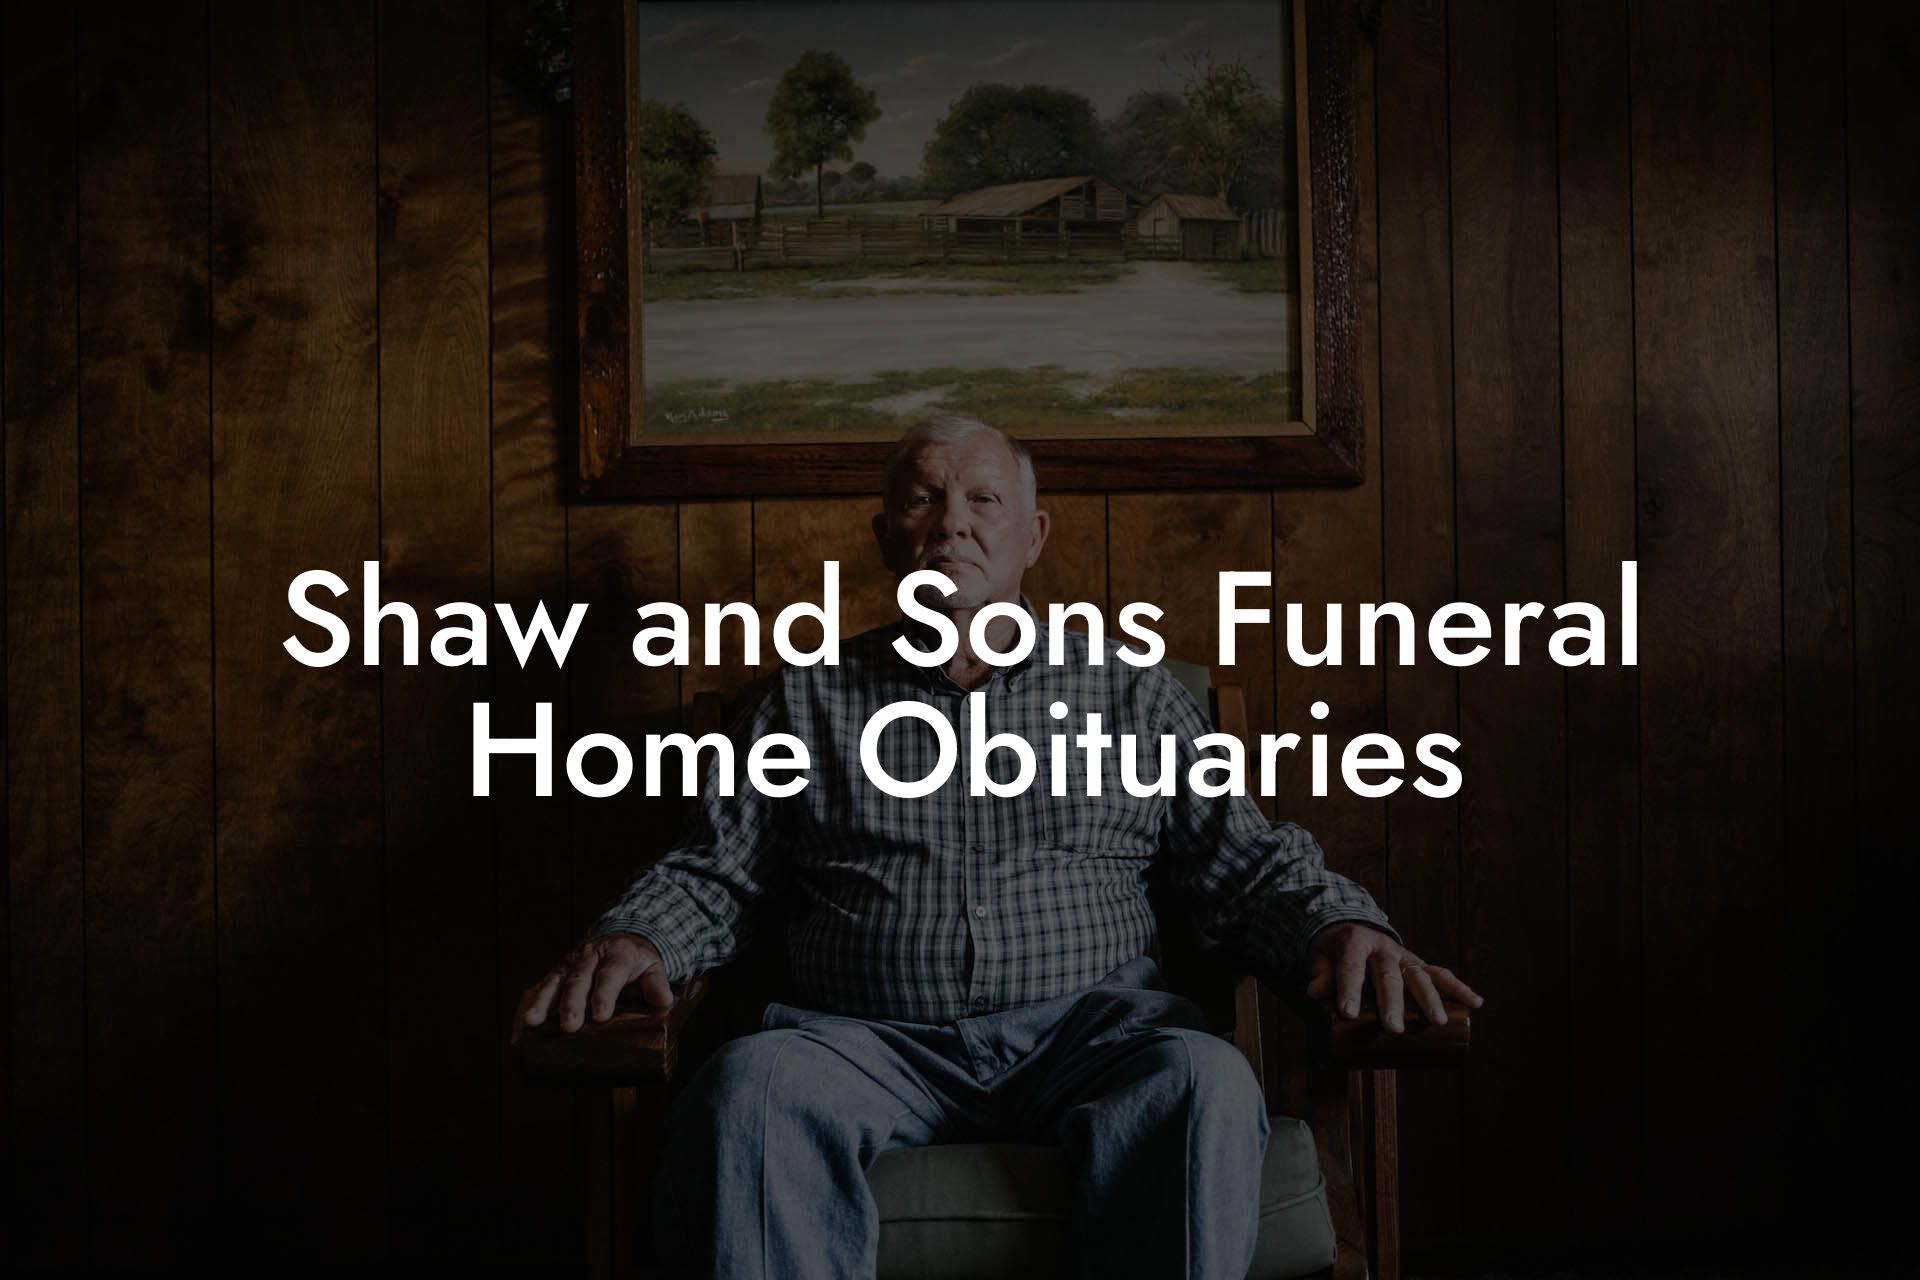 Shaw and Sons Funeral Home Obituaries